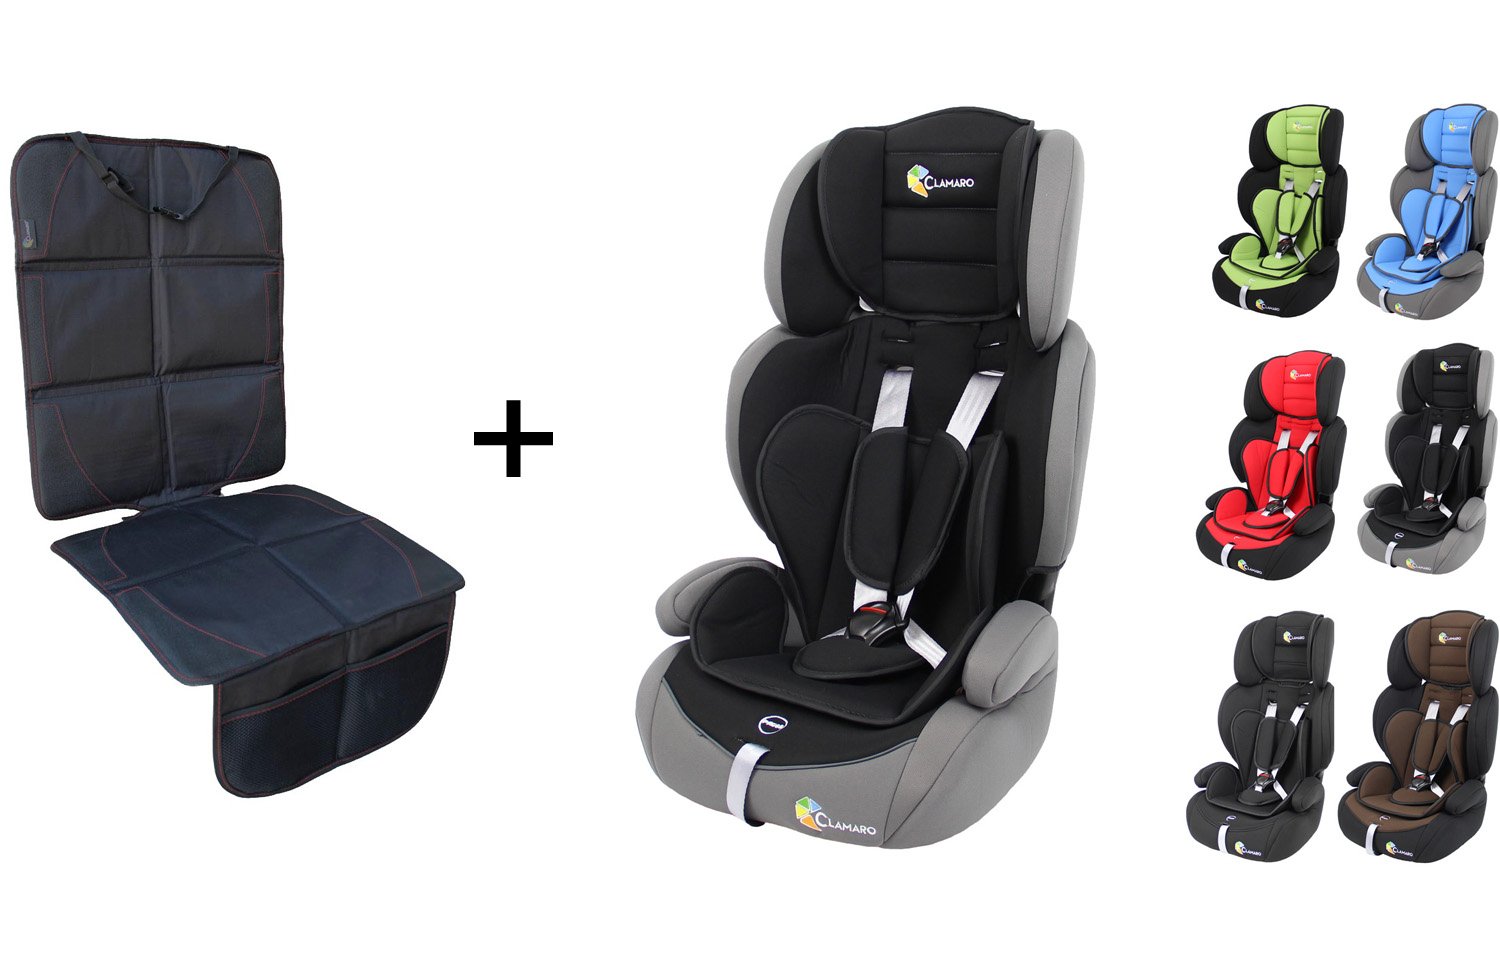 Clamaro Guardian Set Child Car Seat 9-36 kg Grows with Child Car Seat Protector Car Seat for Children from 1-12 Years Group 1/2/3 ECE R44/04 Colour: Grey / Black